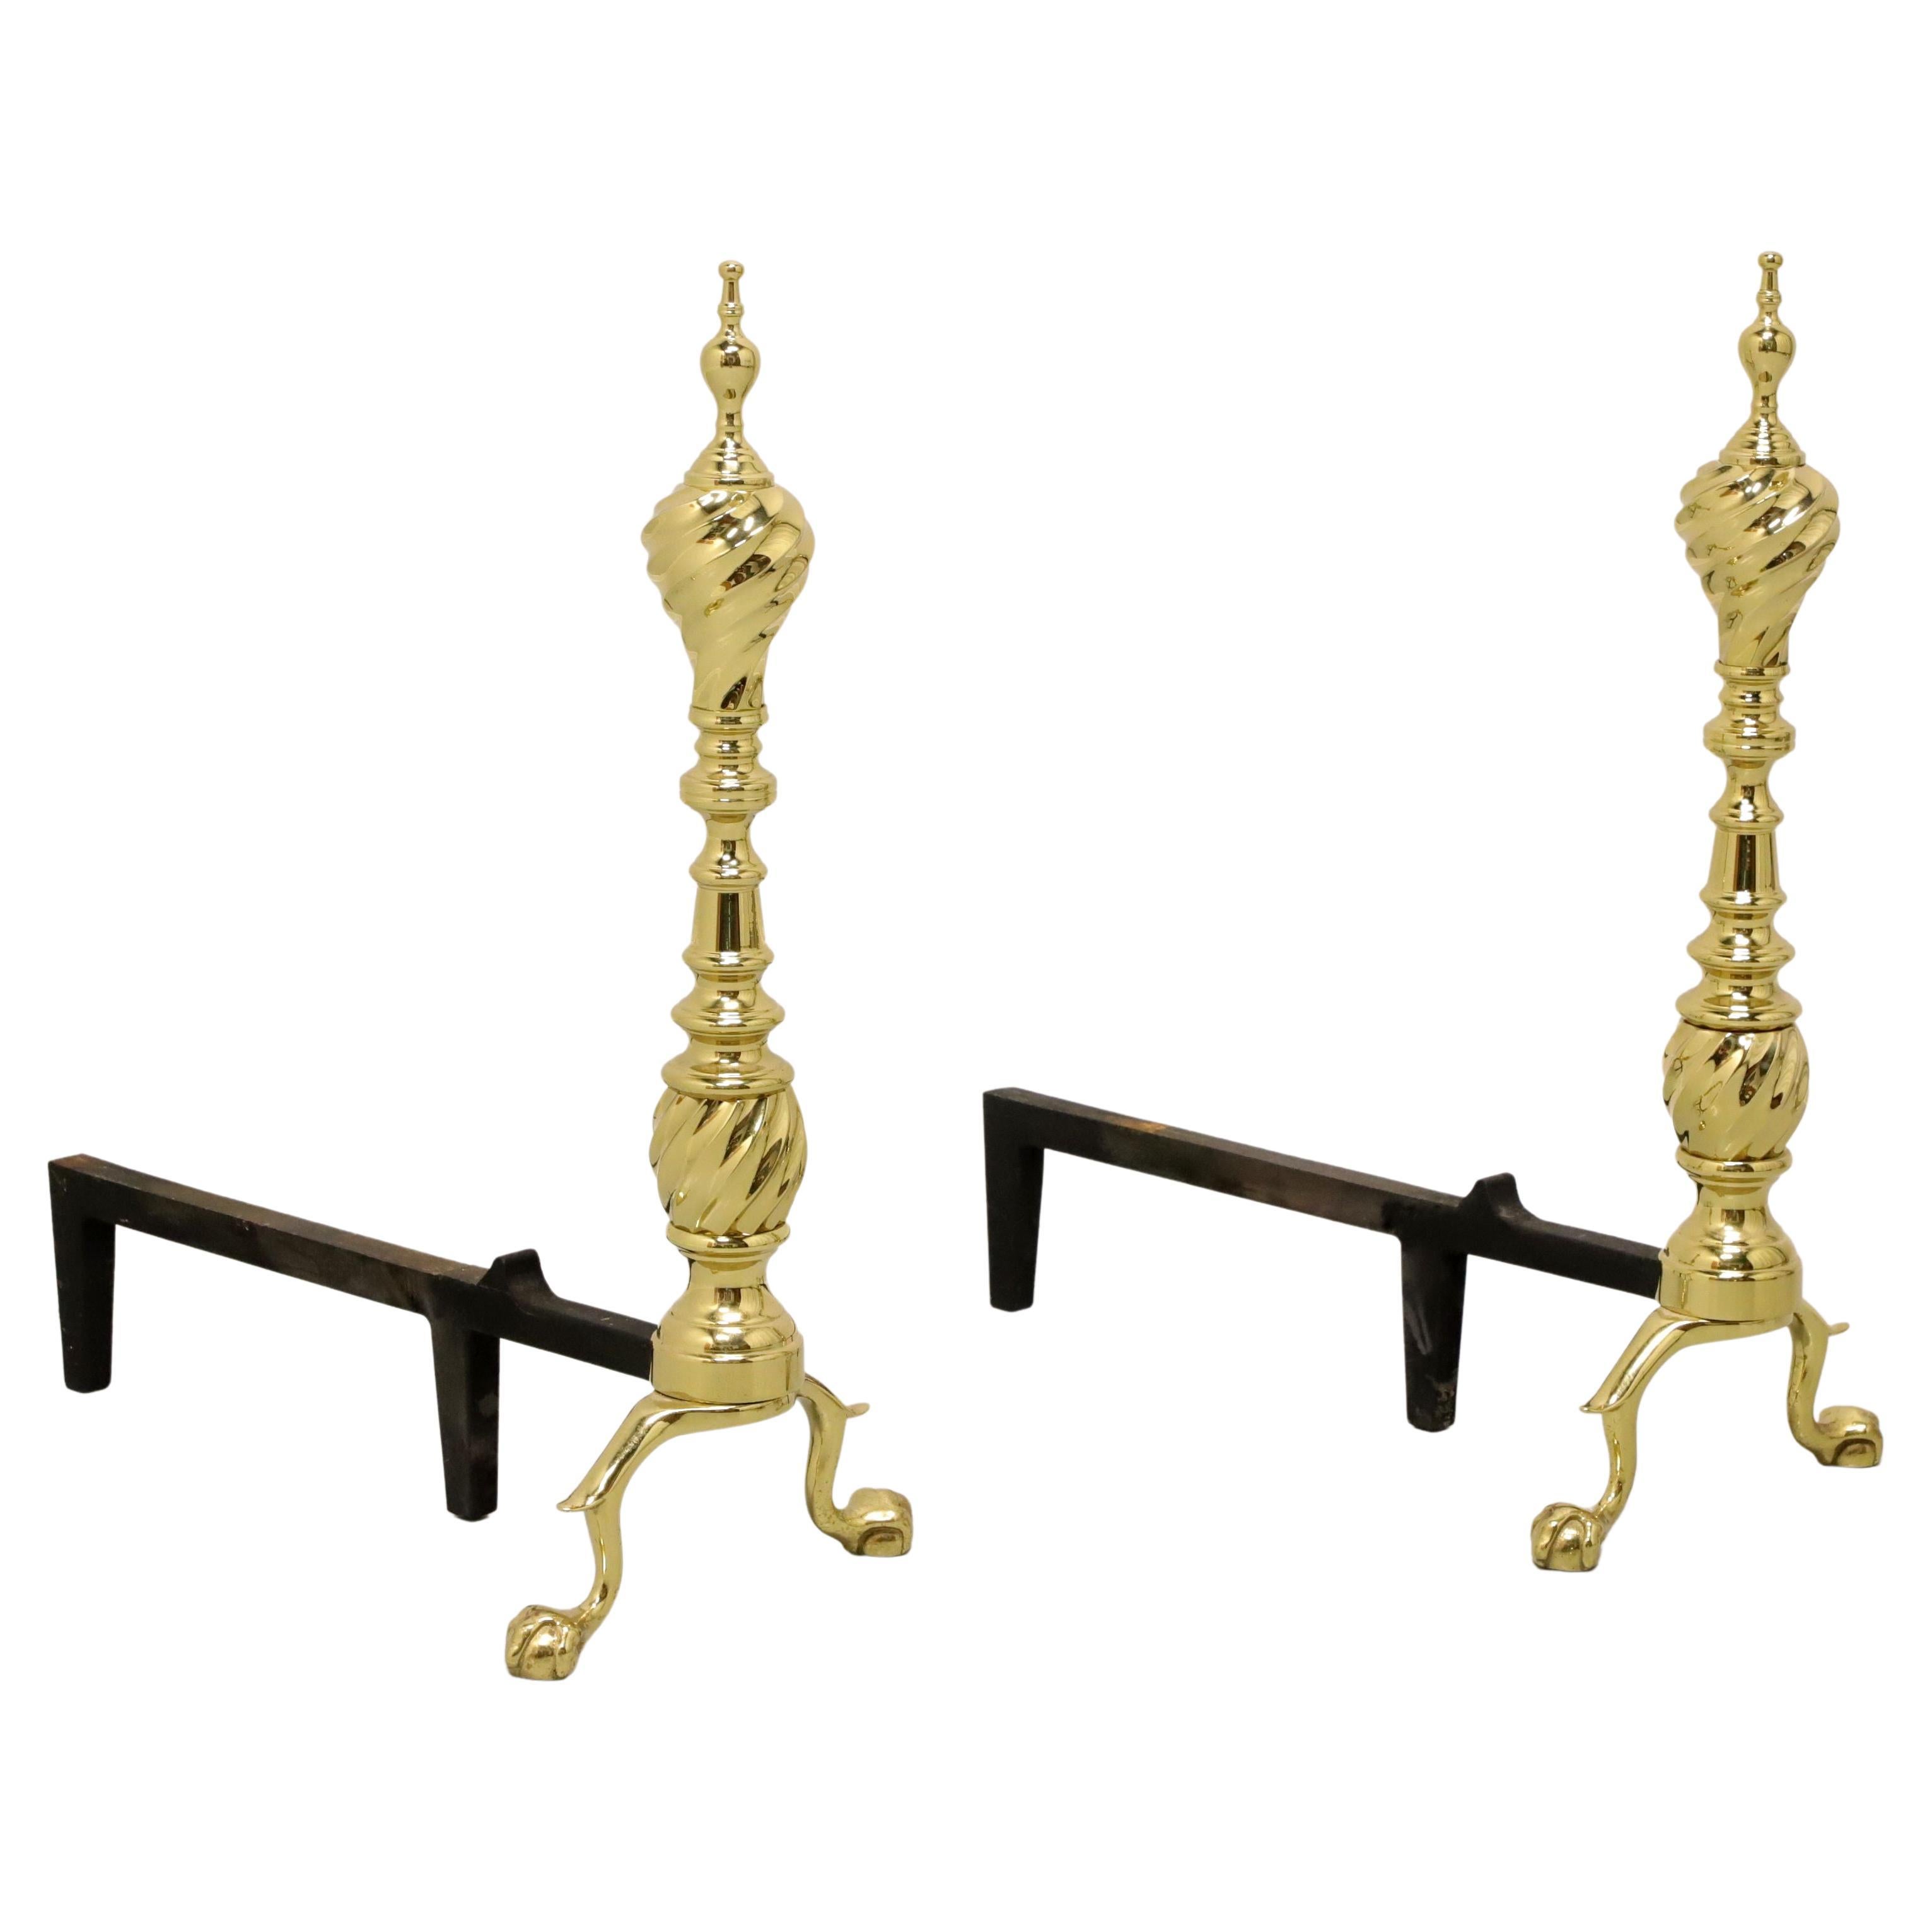 VIRGINIA METALCRAFTERS Middleton House Brass & Metal Fireplace Andirons - A For Sale